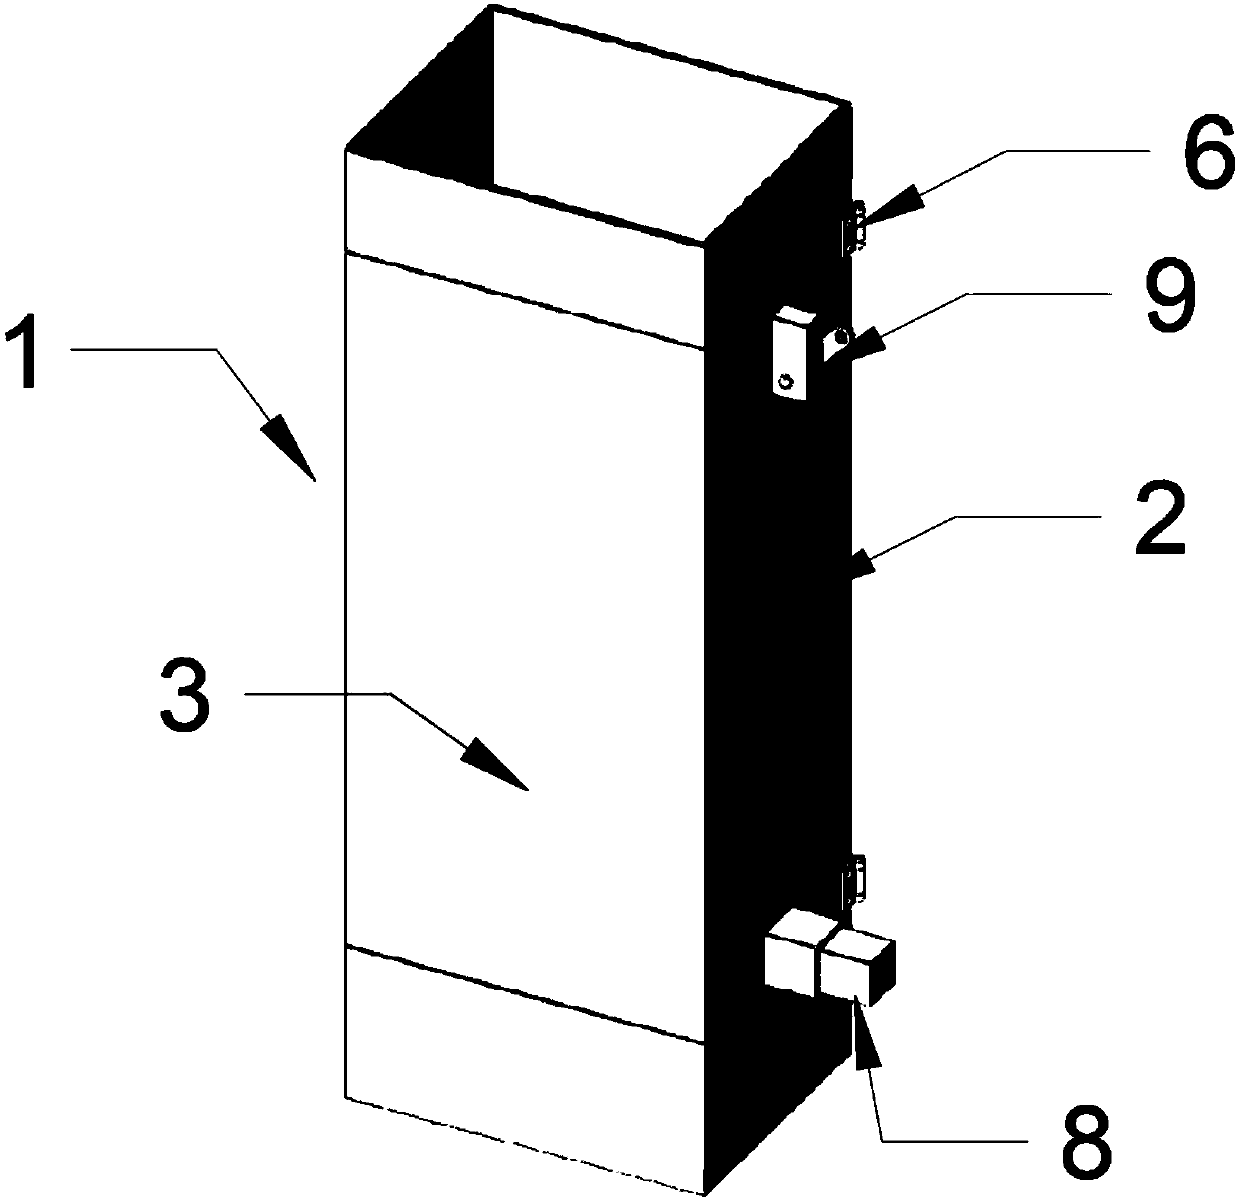 Opening and closing device